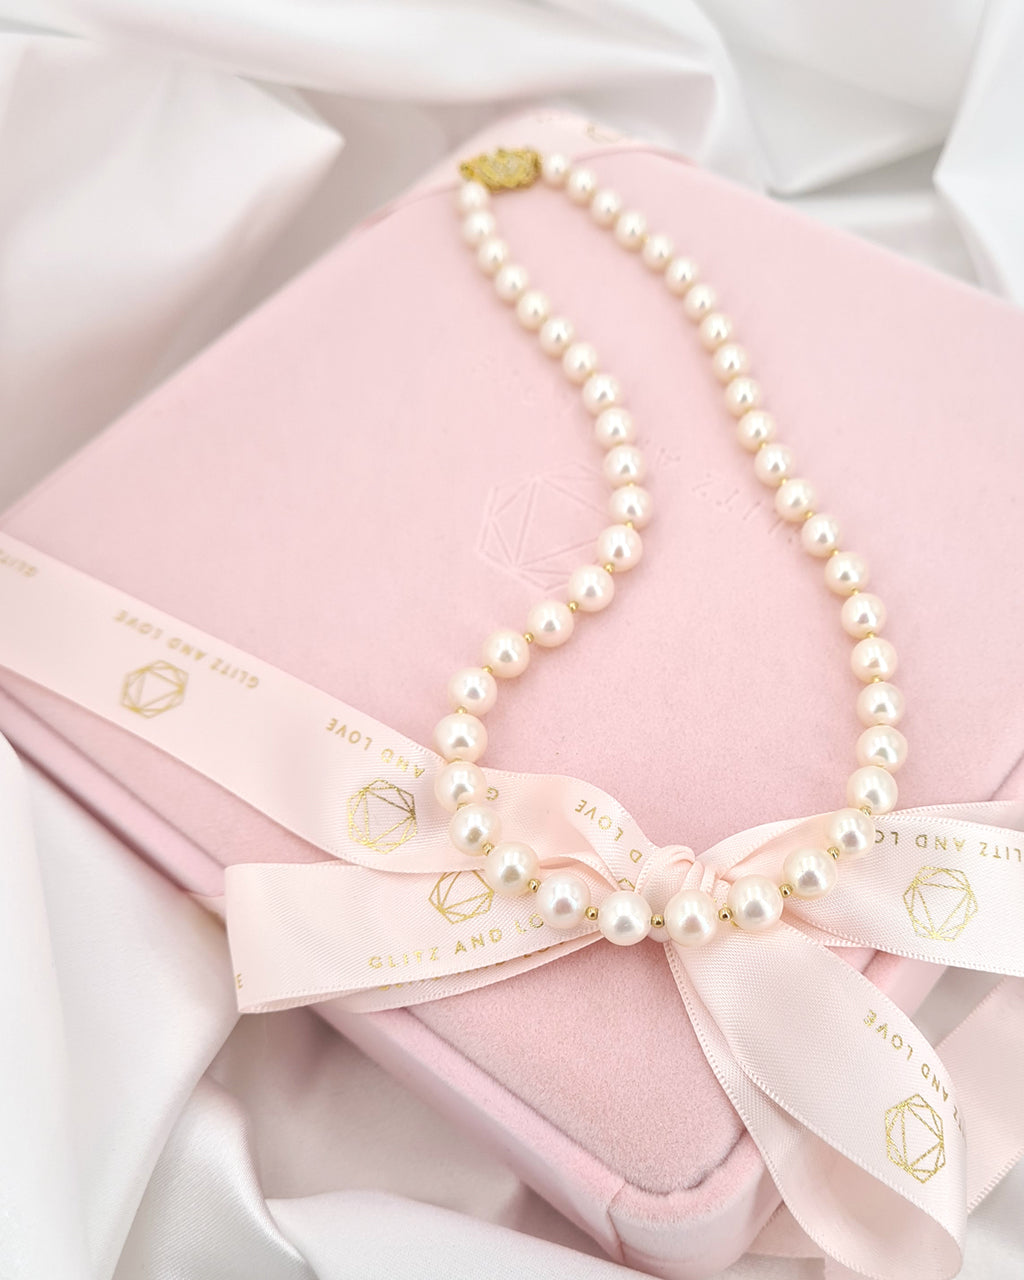 Elegant White Pearl Necklace  The Perfect Gift for Mothers & Brides -  Glitz And Love